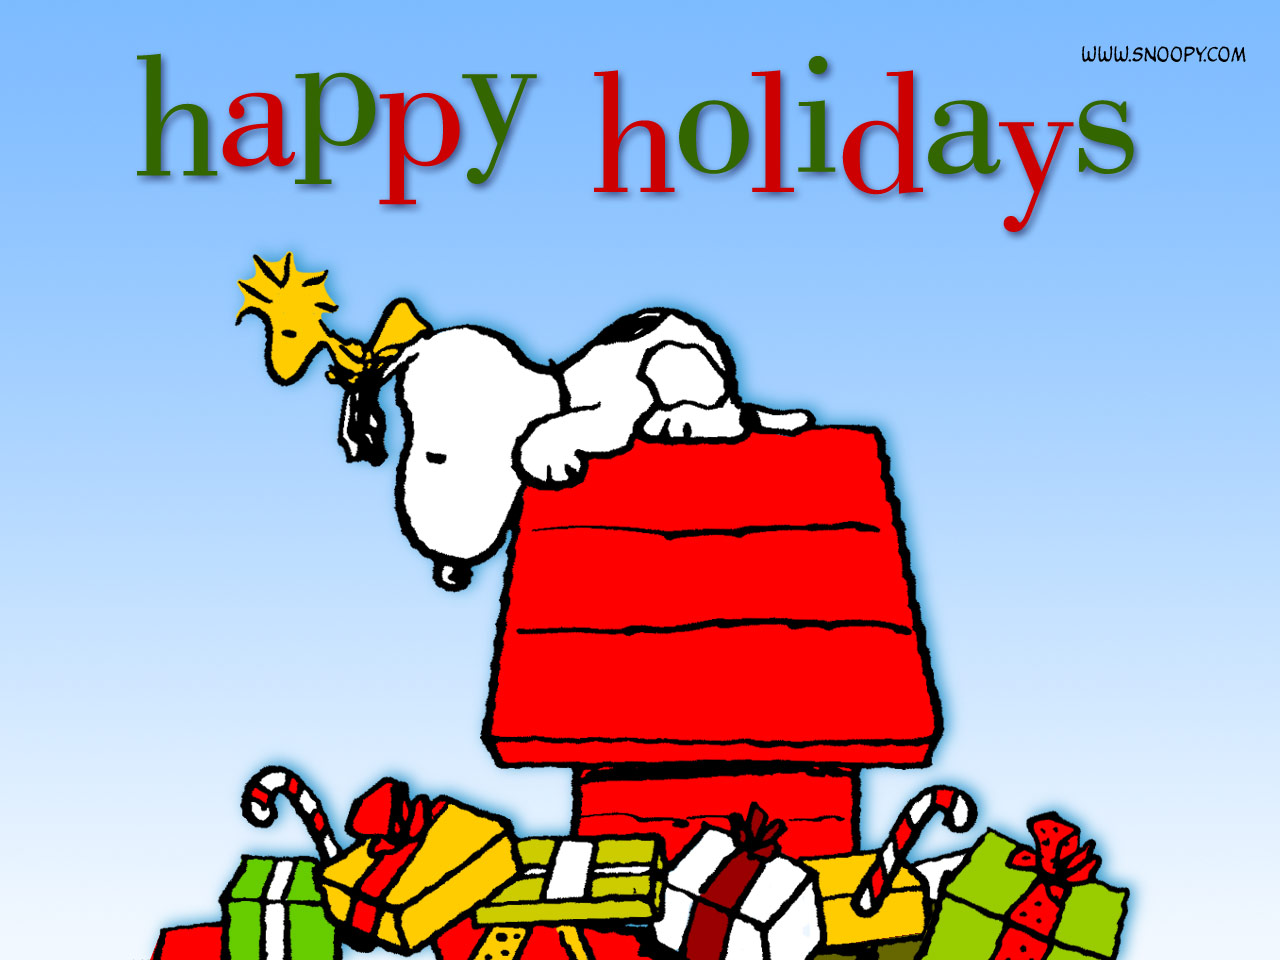 Snoopy Christmas Graphics | quotes.